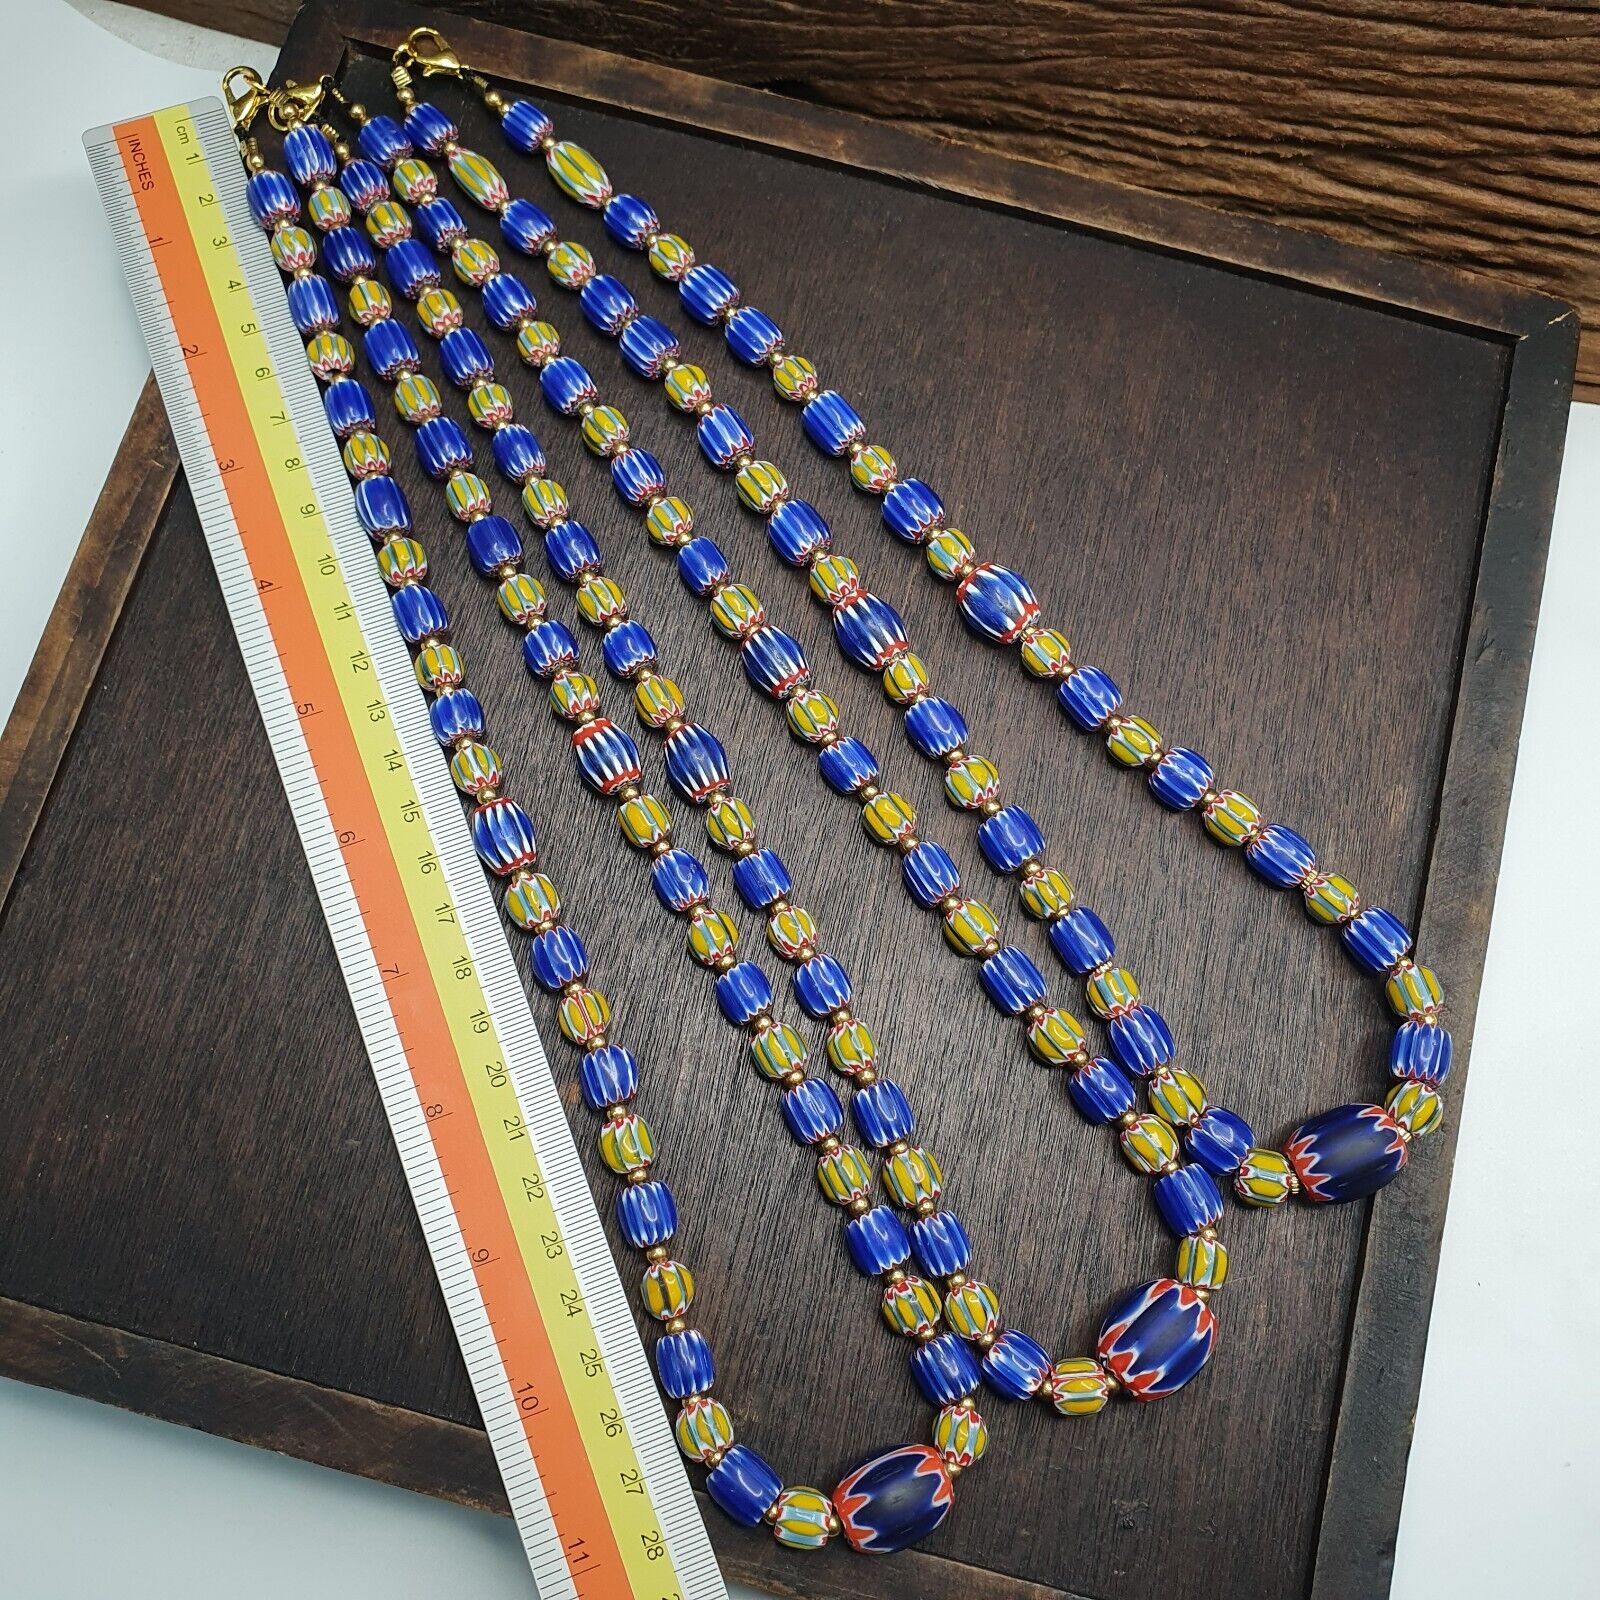 Vintage Old Blue, yellow Chevron Trade beads Old African Glass Beads Necklace